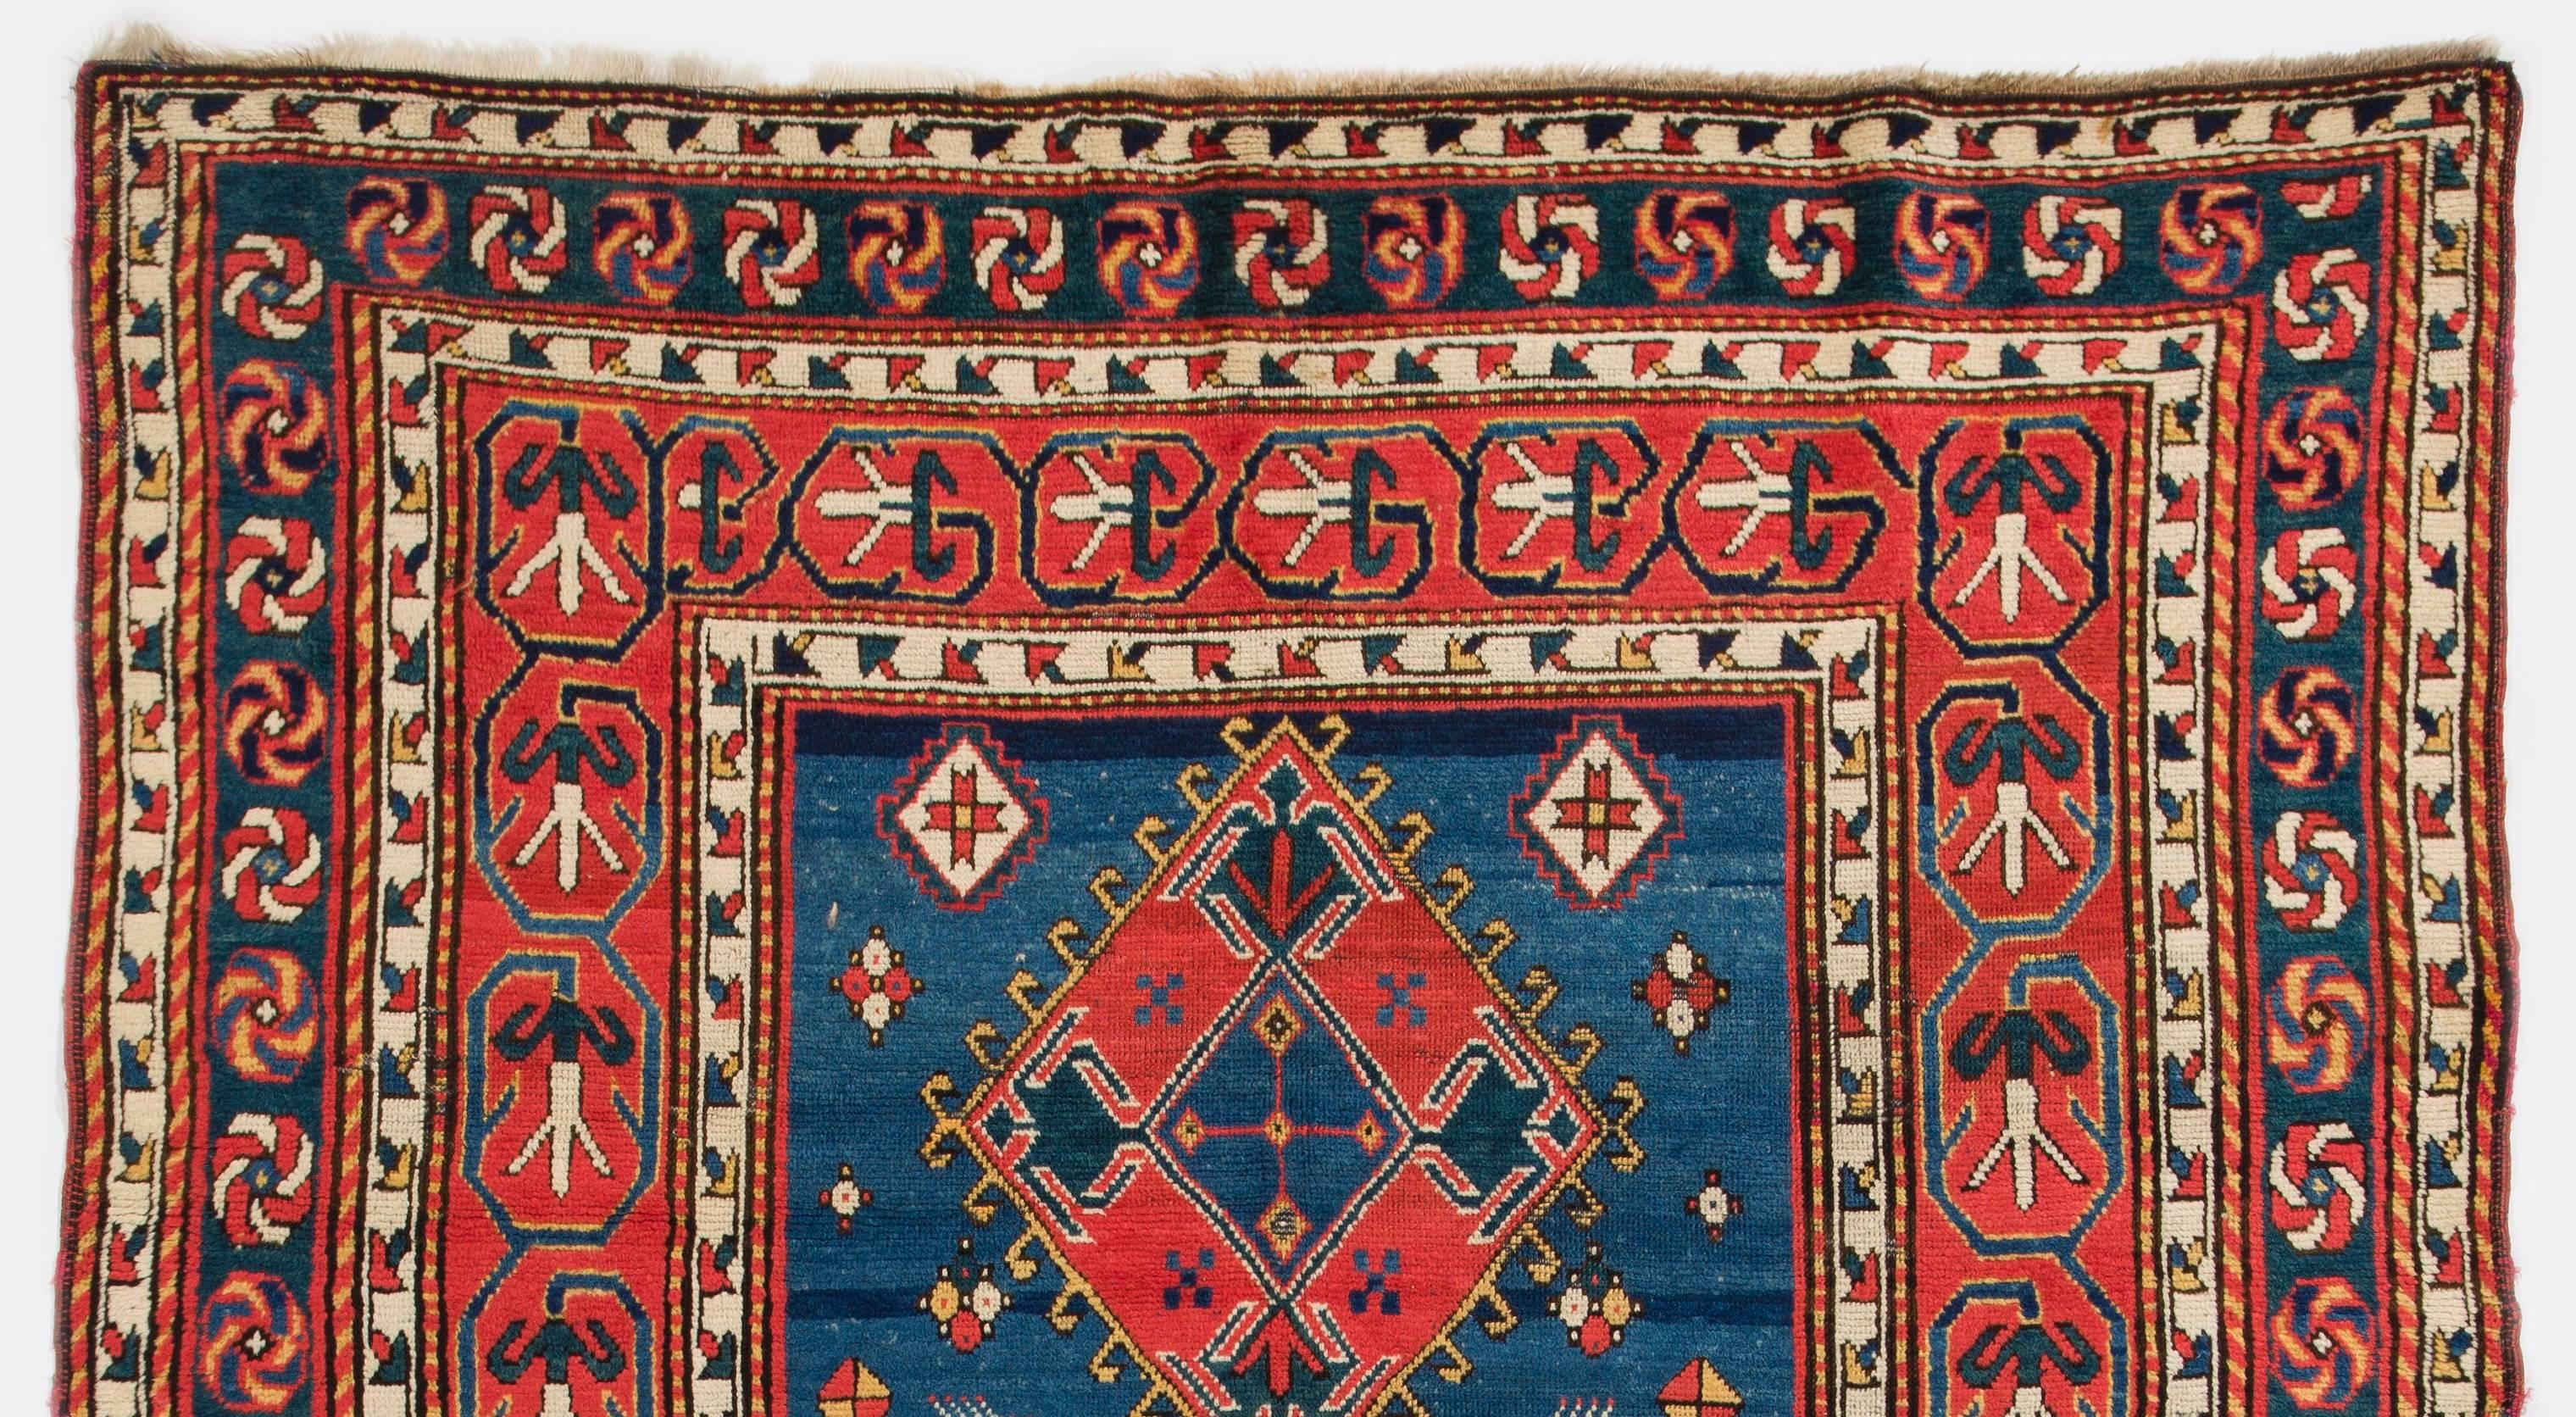 Hand-Knotted Outstanding Antique Caucasian Kazak Rug